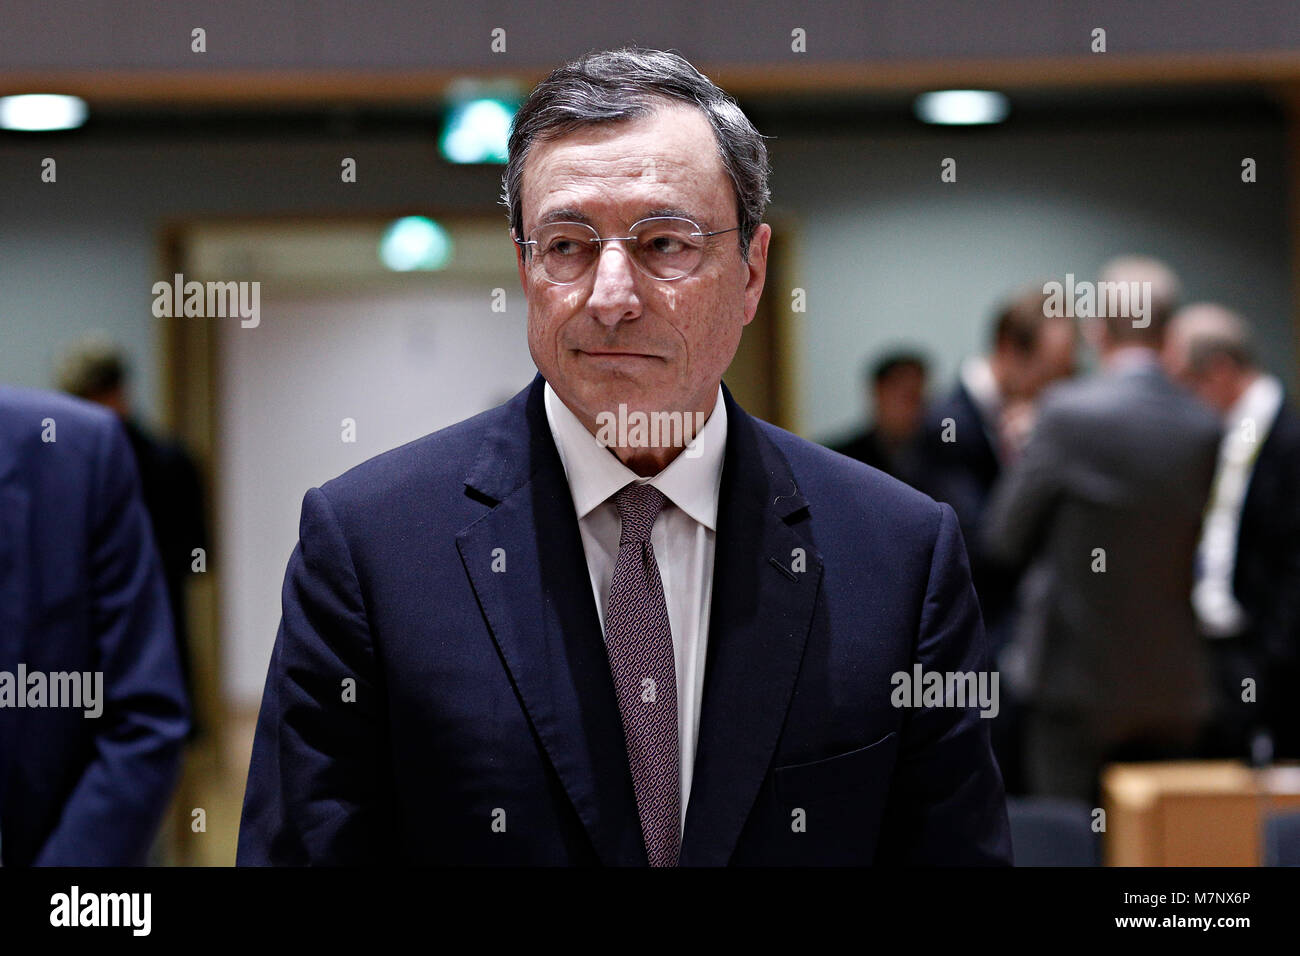 Brussels, Belgium. 12th March, 2018. European Central Bank President Mario Draghi during a meeting of eurogroup at the EU Council building in Brussels, Belgium  on March 12, 2018. Alexandros Michailidis/Alamy Live News Stock Photo